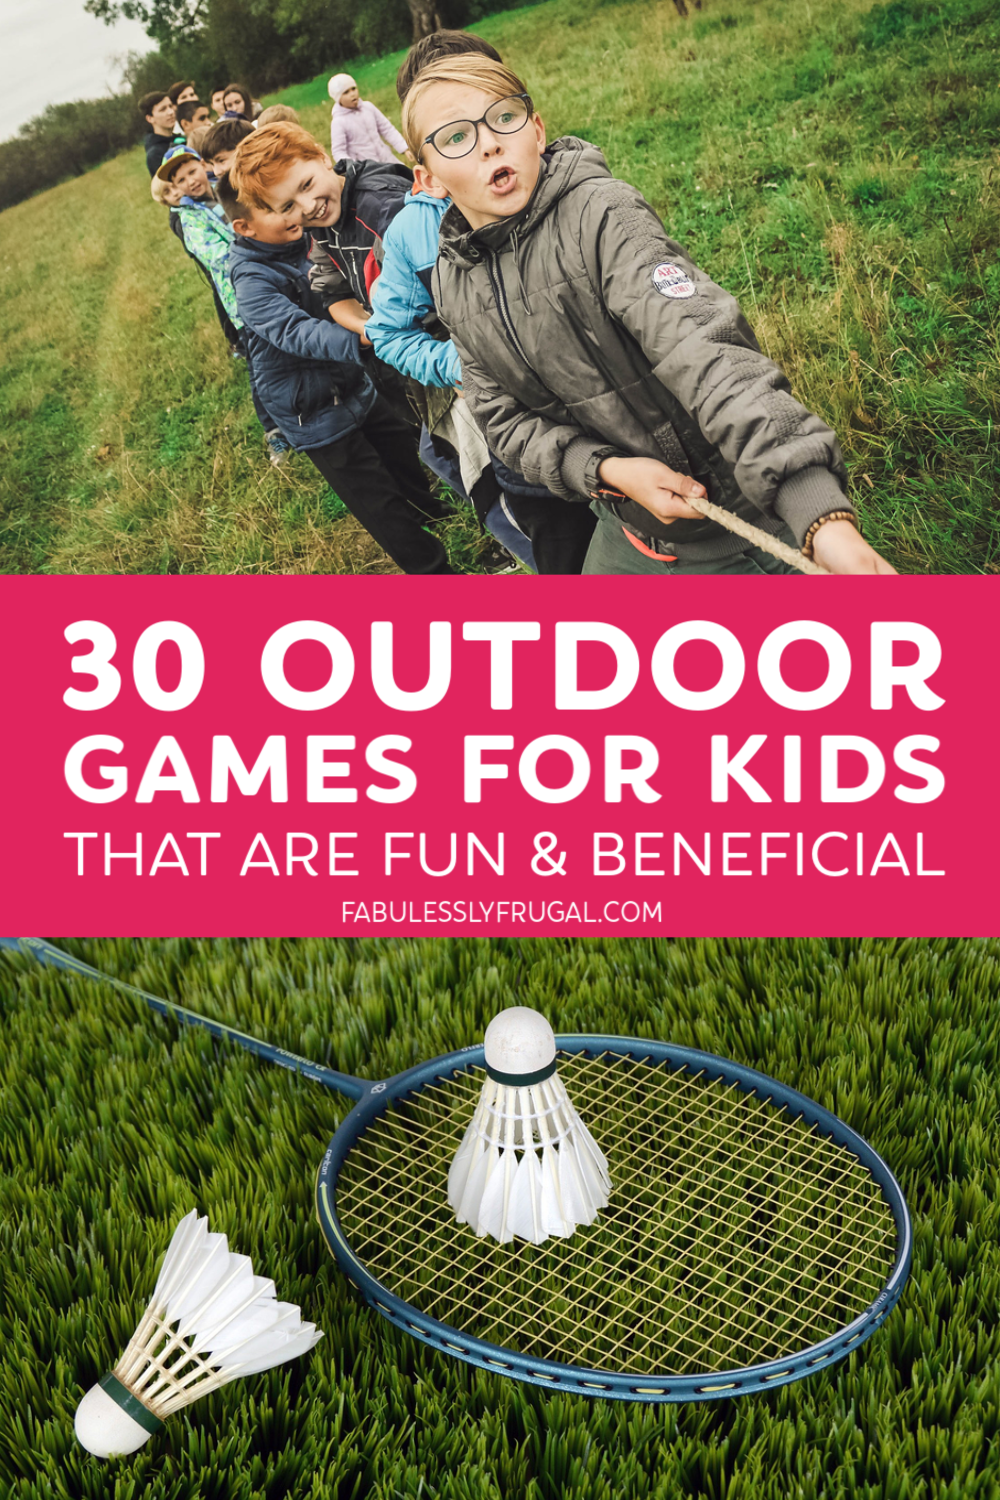 Outdoor games for kids that are fun and beneficial